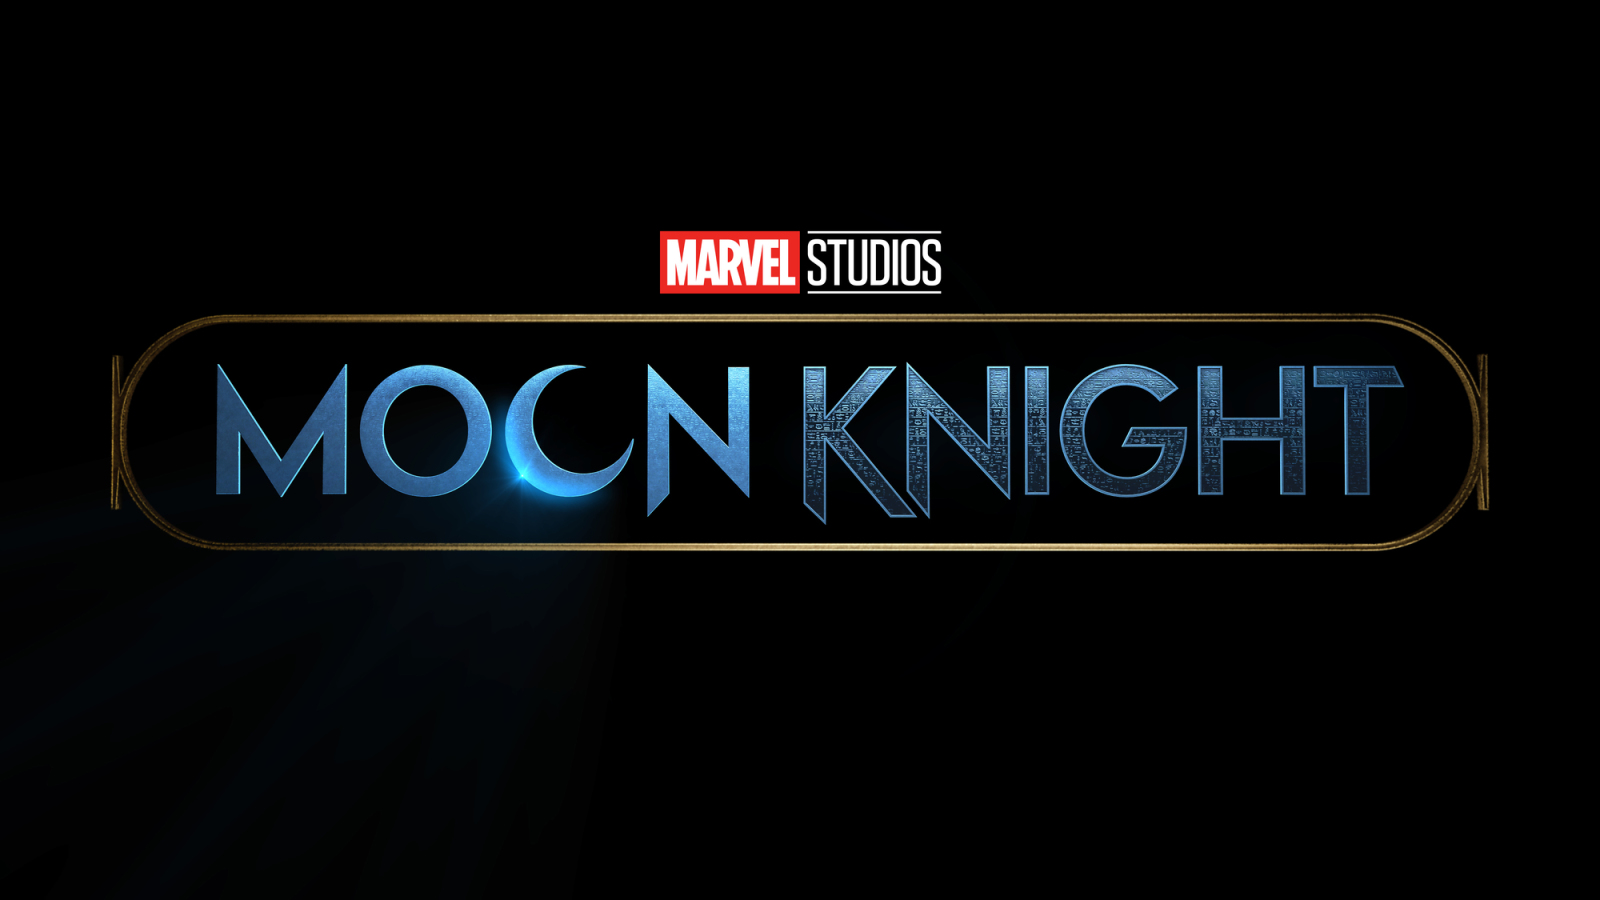 Moon Knight: What to expect from the MCU series